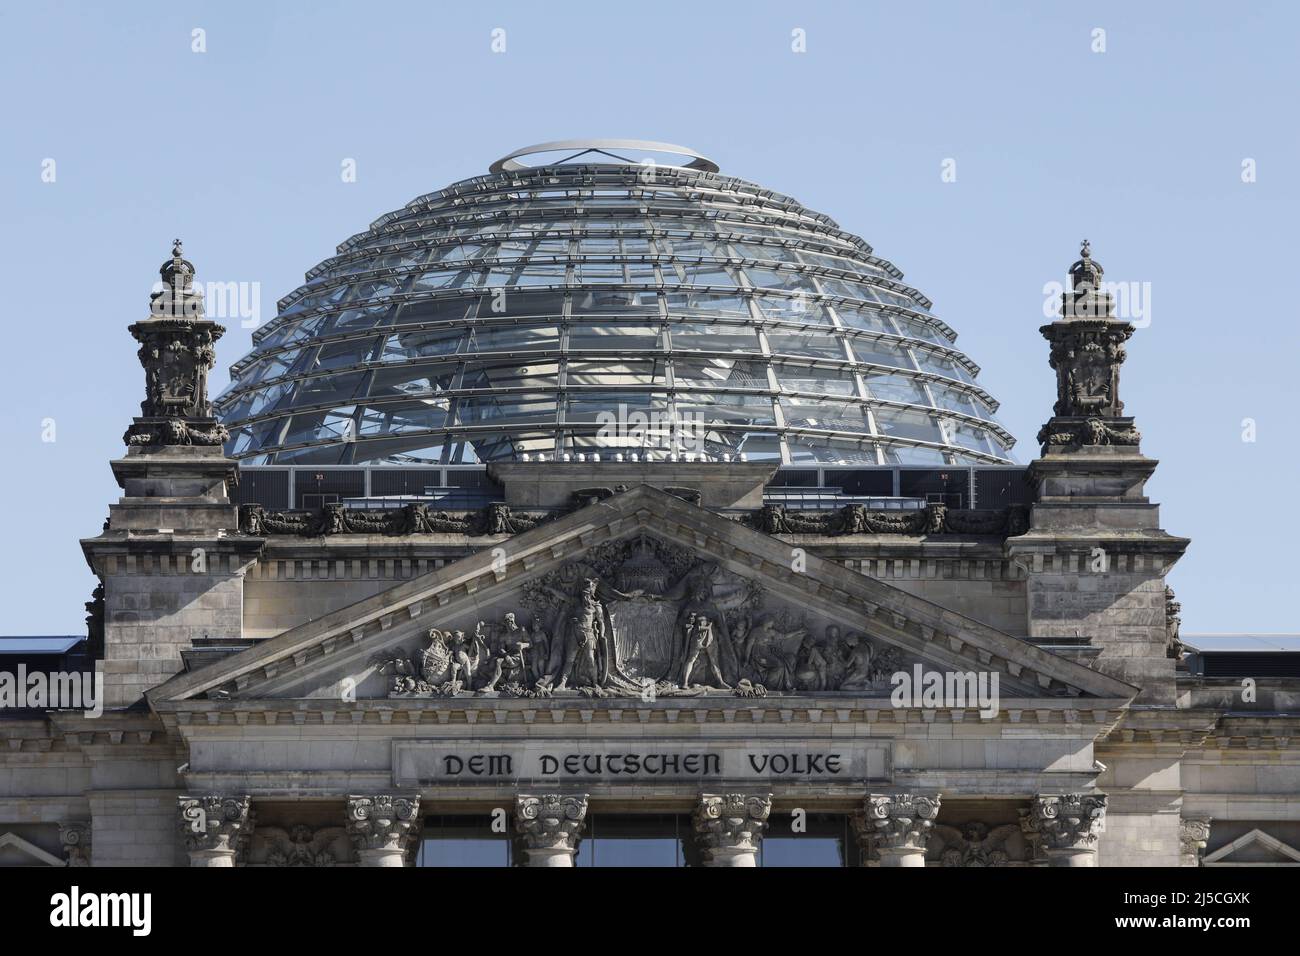 View of the empty dome of the Reichstag. The dome and roof terrace of the Reichstag building are closed to visitors until further notice to prevent the spread of the corona virus here as well. [automated translation] Stock Photo